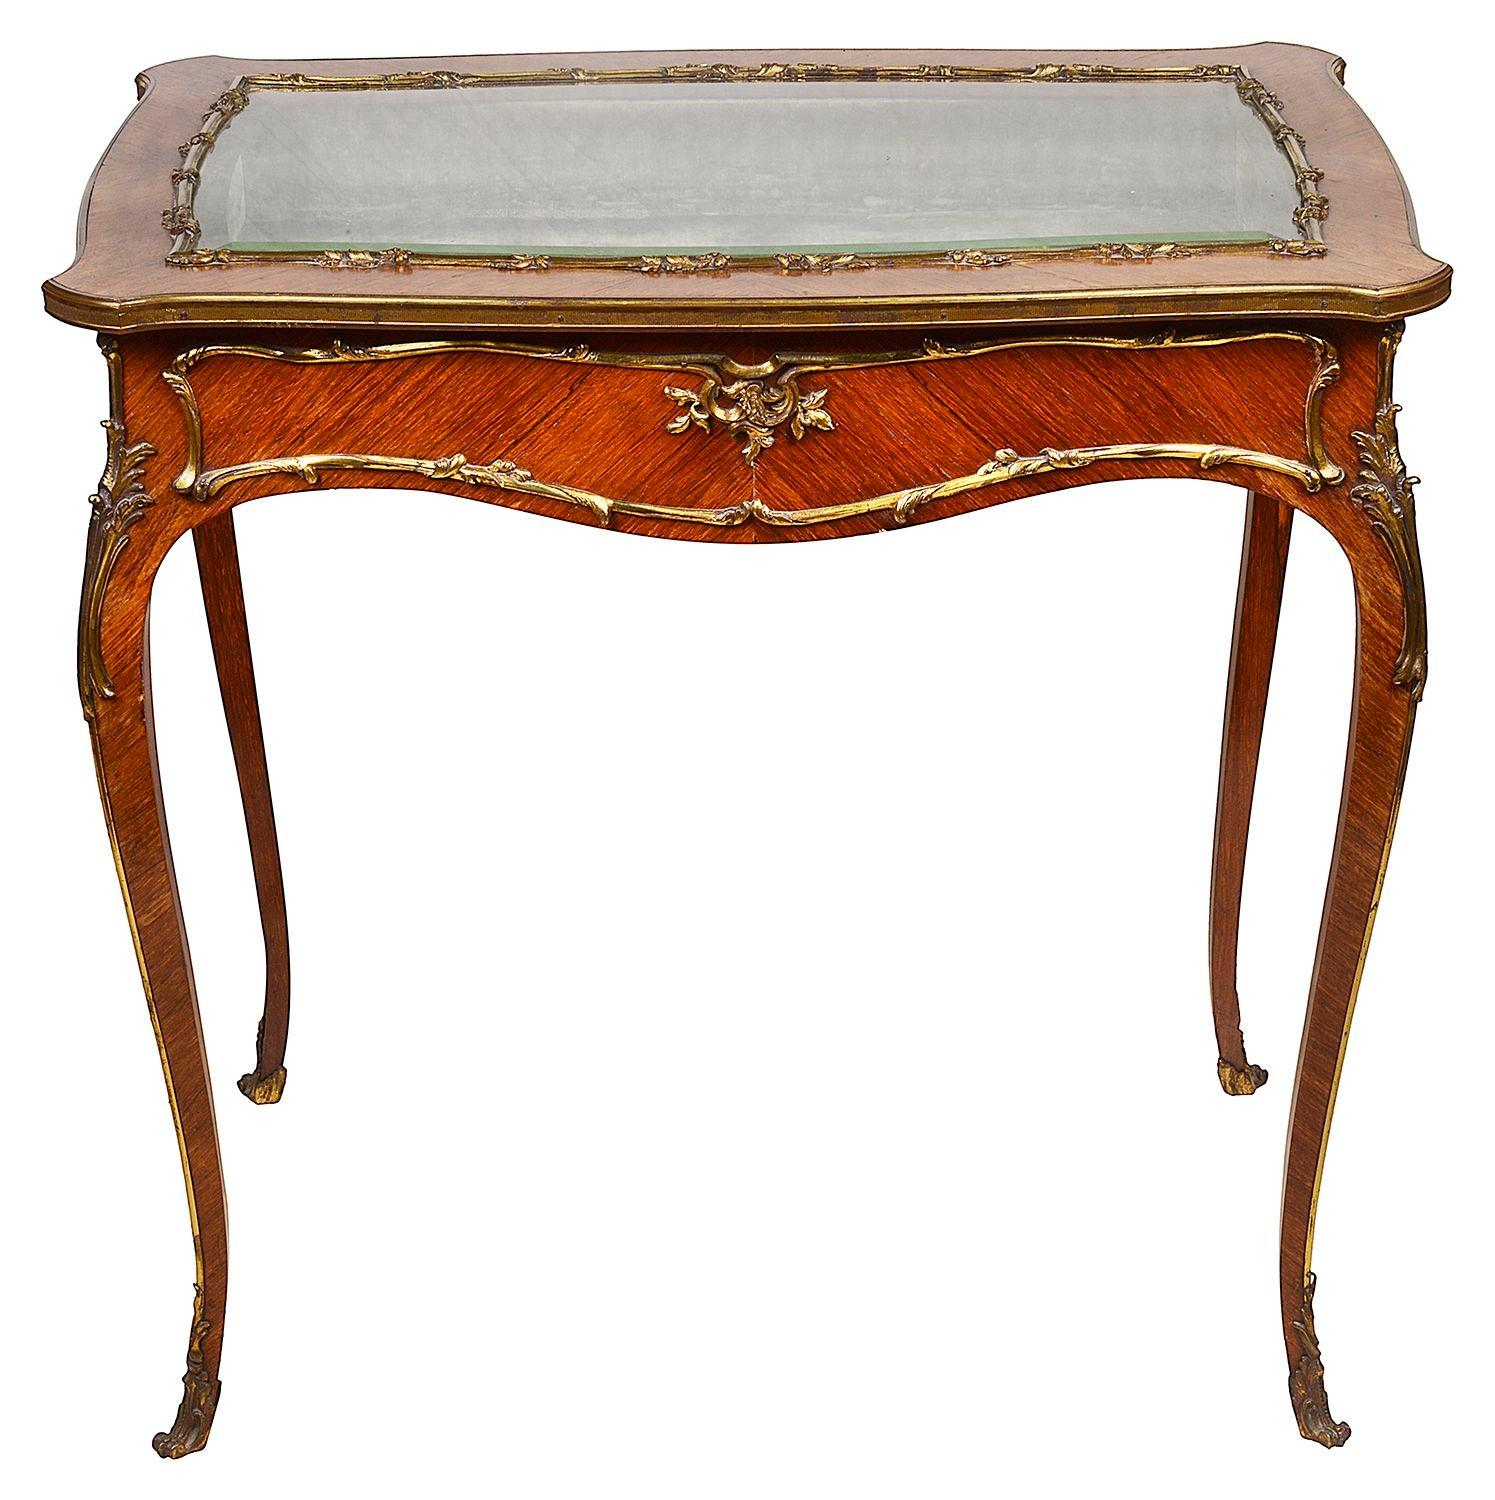 Ormolu French Kingwood Bijouterie Table, 19th Century For Sale